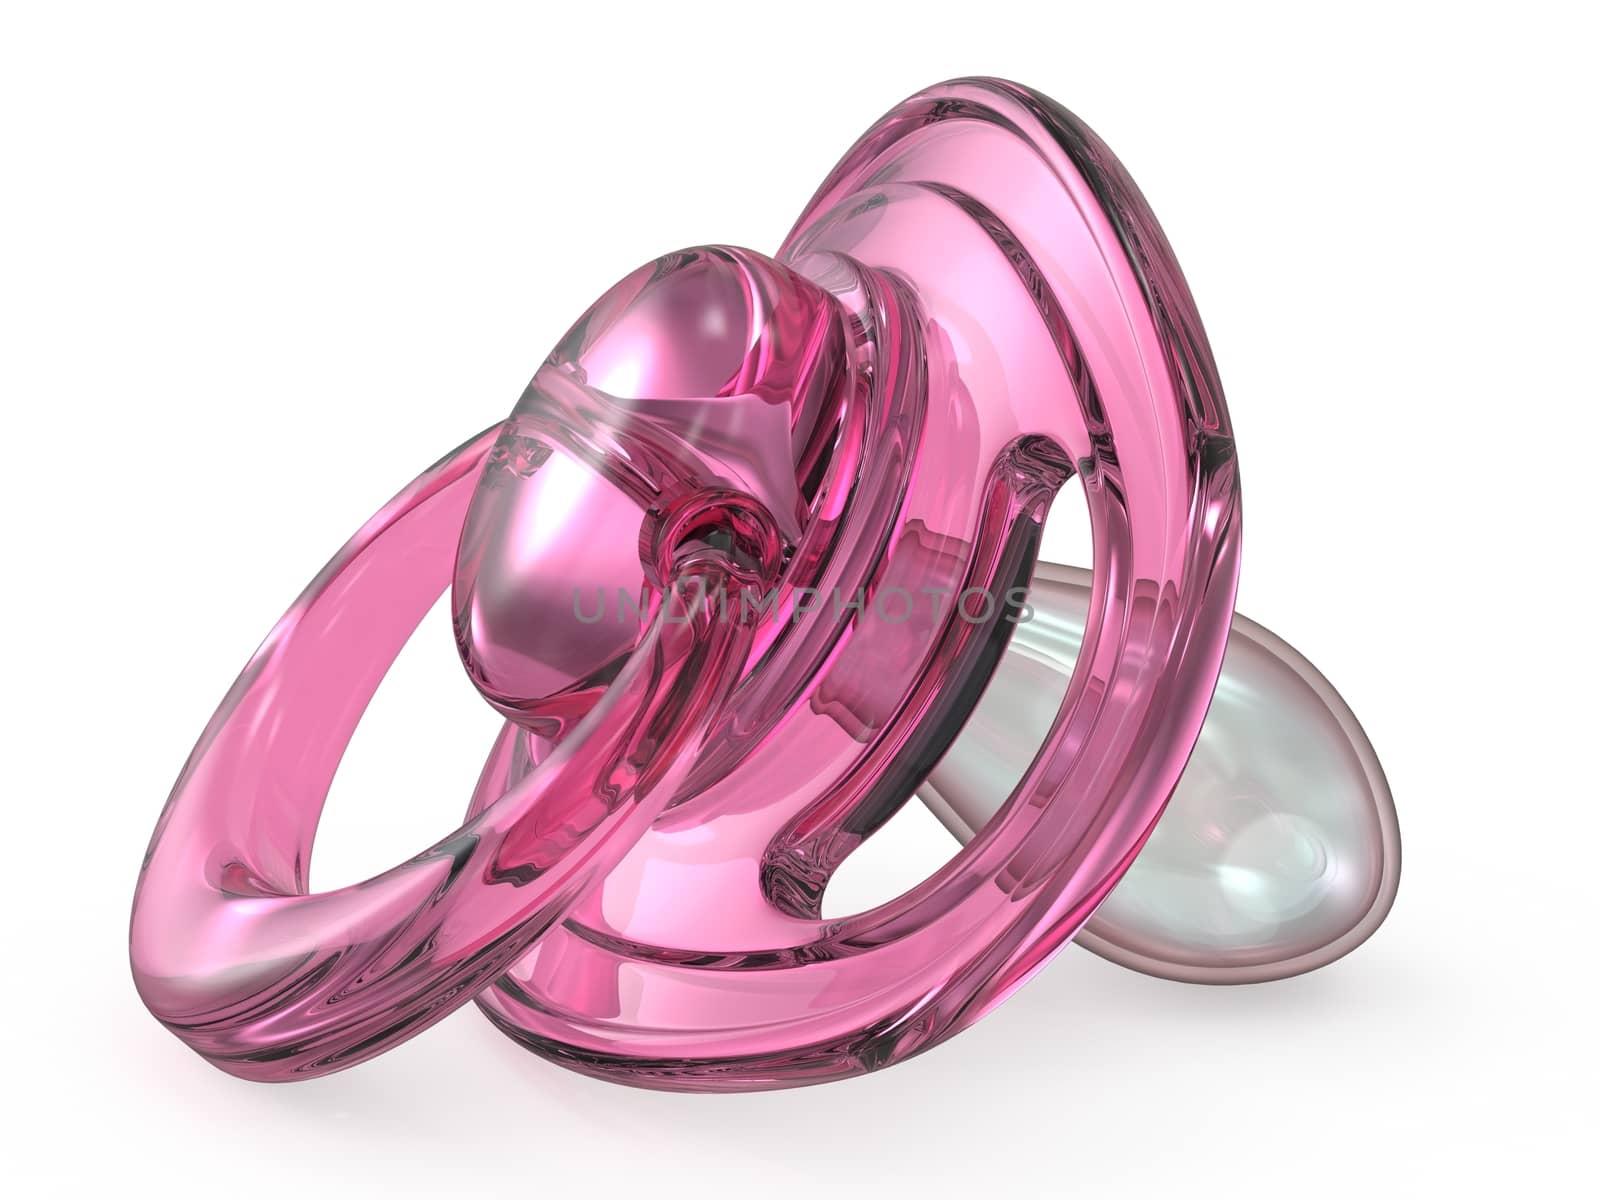 Pink baby pacifier side view 3D render illustration isolated on white background